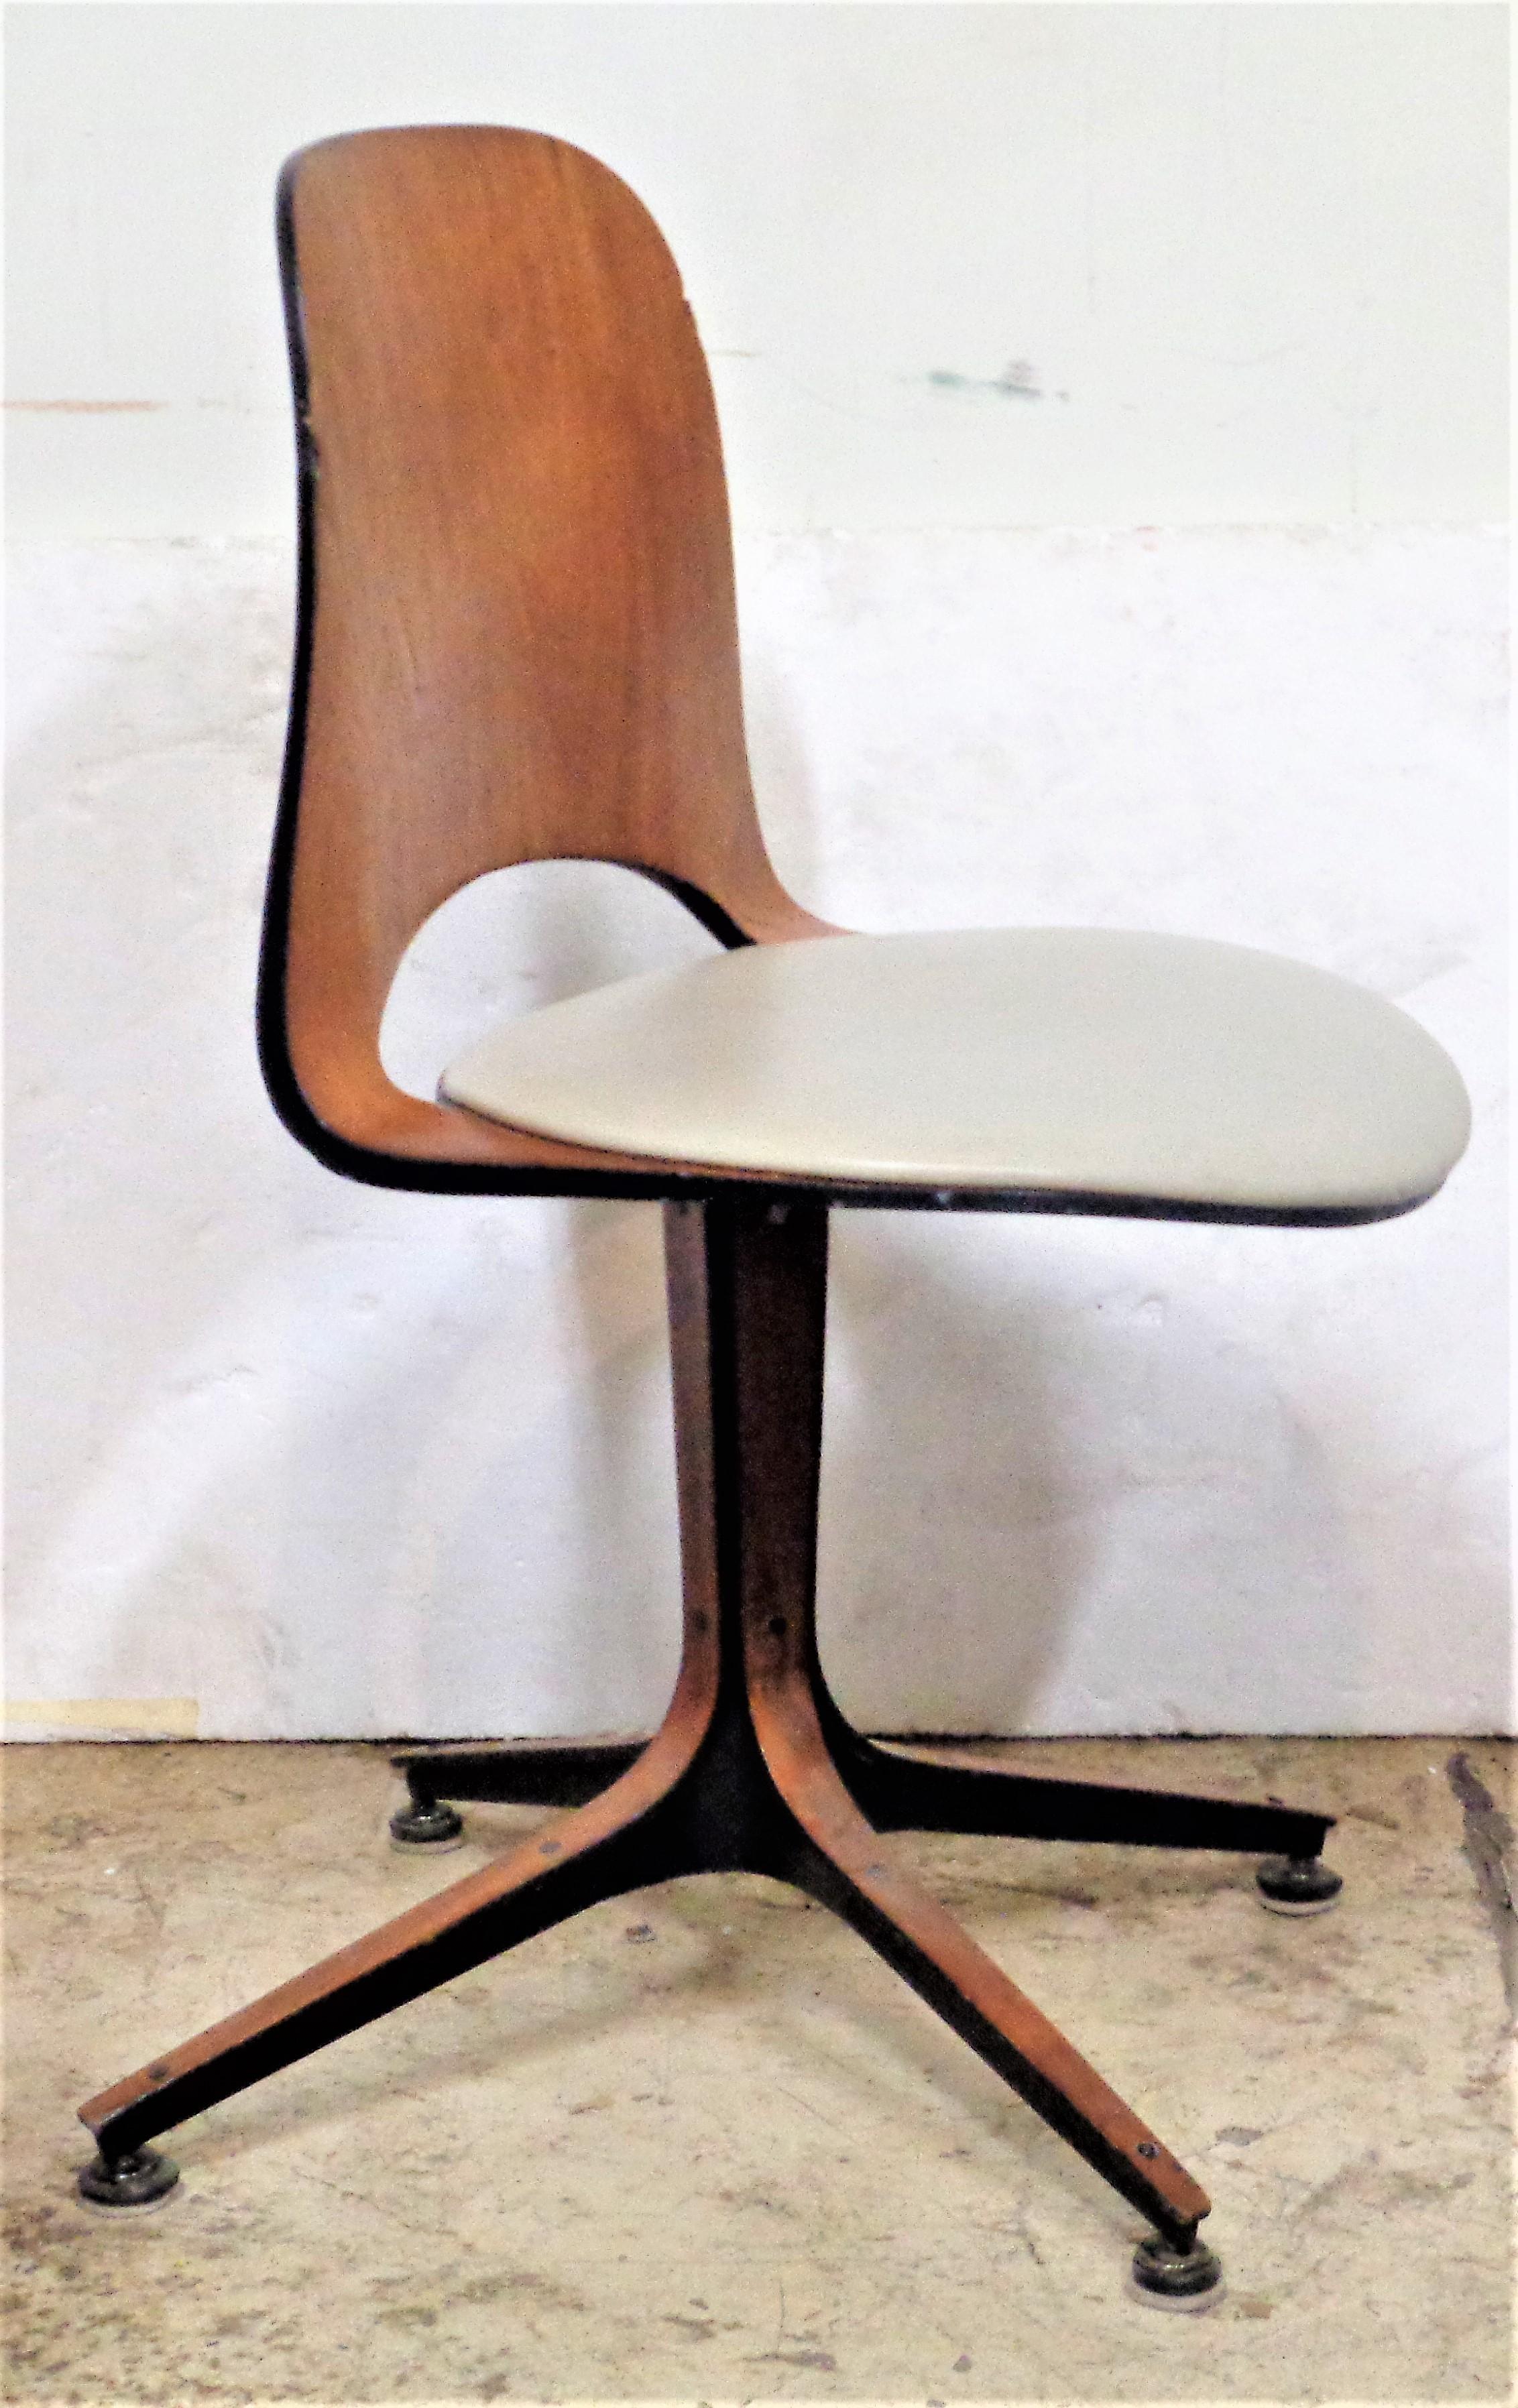 George Mulhauser for Plycraft swivel desk chair in walnut veneer with the original cream white vinyl seat. Seat swivels a full 360 degrees. Circa 1950. Look at all pictures and read condition report in comment section. 
**** This chair can be boxed